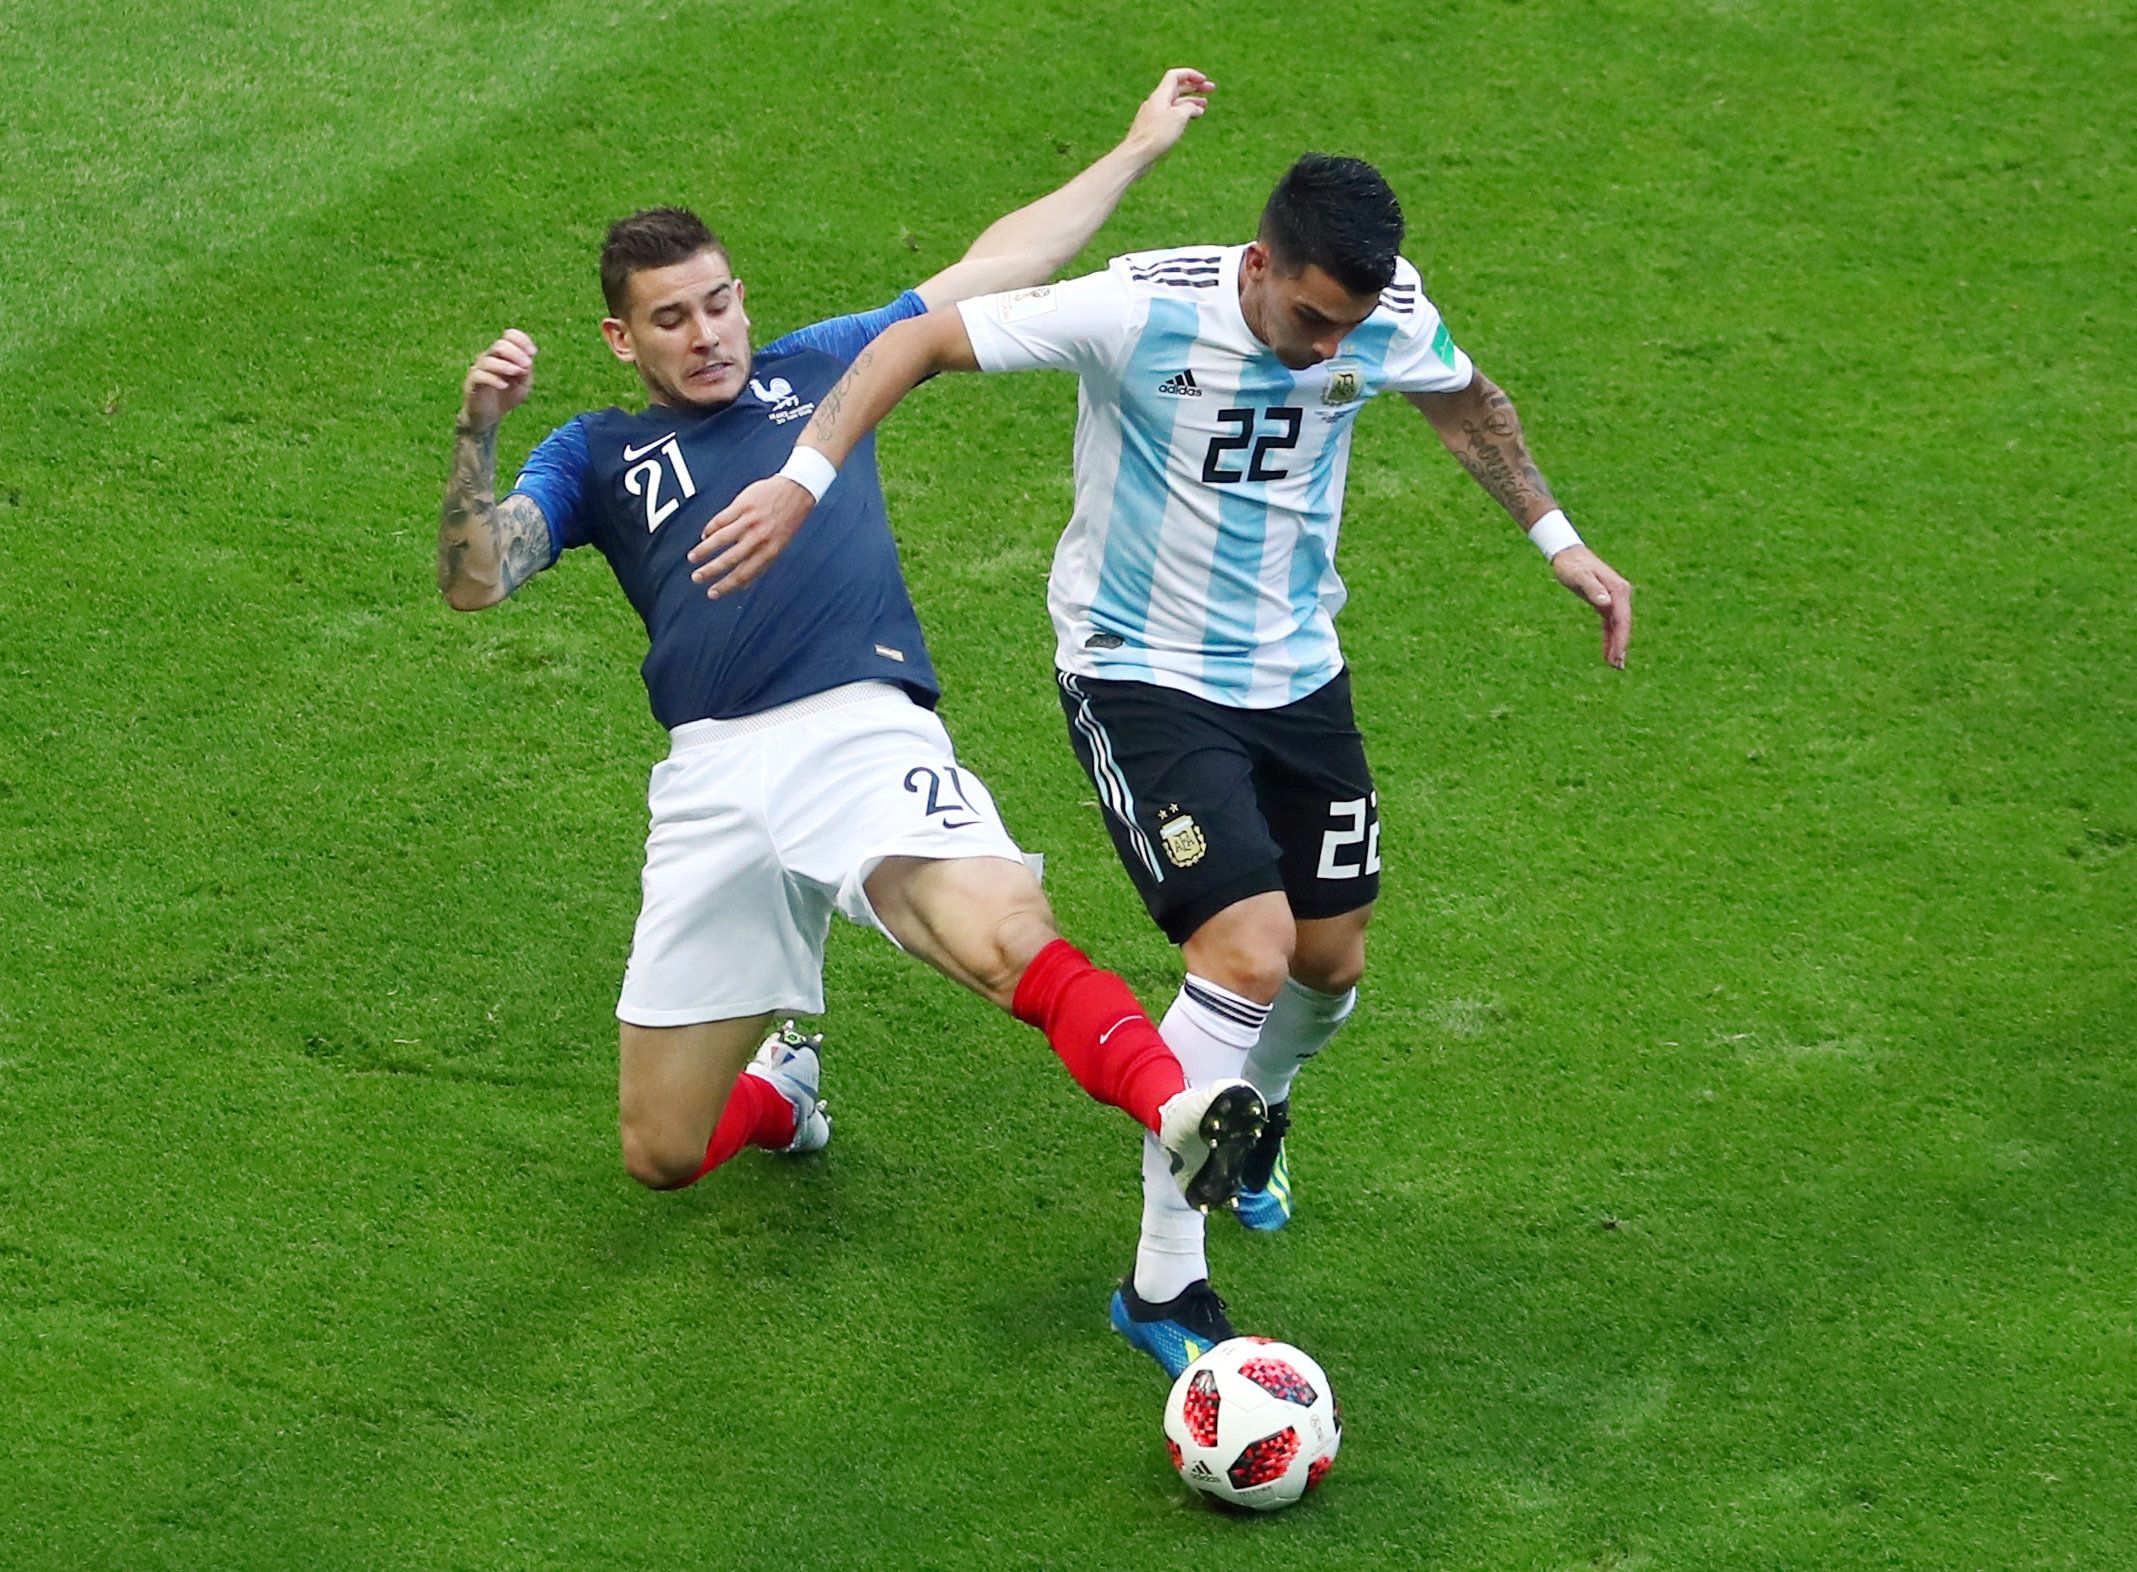 Soccer Football - World Cup - Round of 16 - France vs Argentina - Kazan Arena, Kazan, Russia - June 30, 2018  Argentina's Cristian Pavon in action with France's Lucas Hernandez   REUTERS/Pilar Olivares